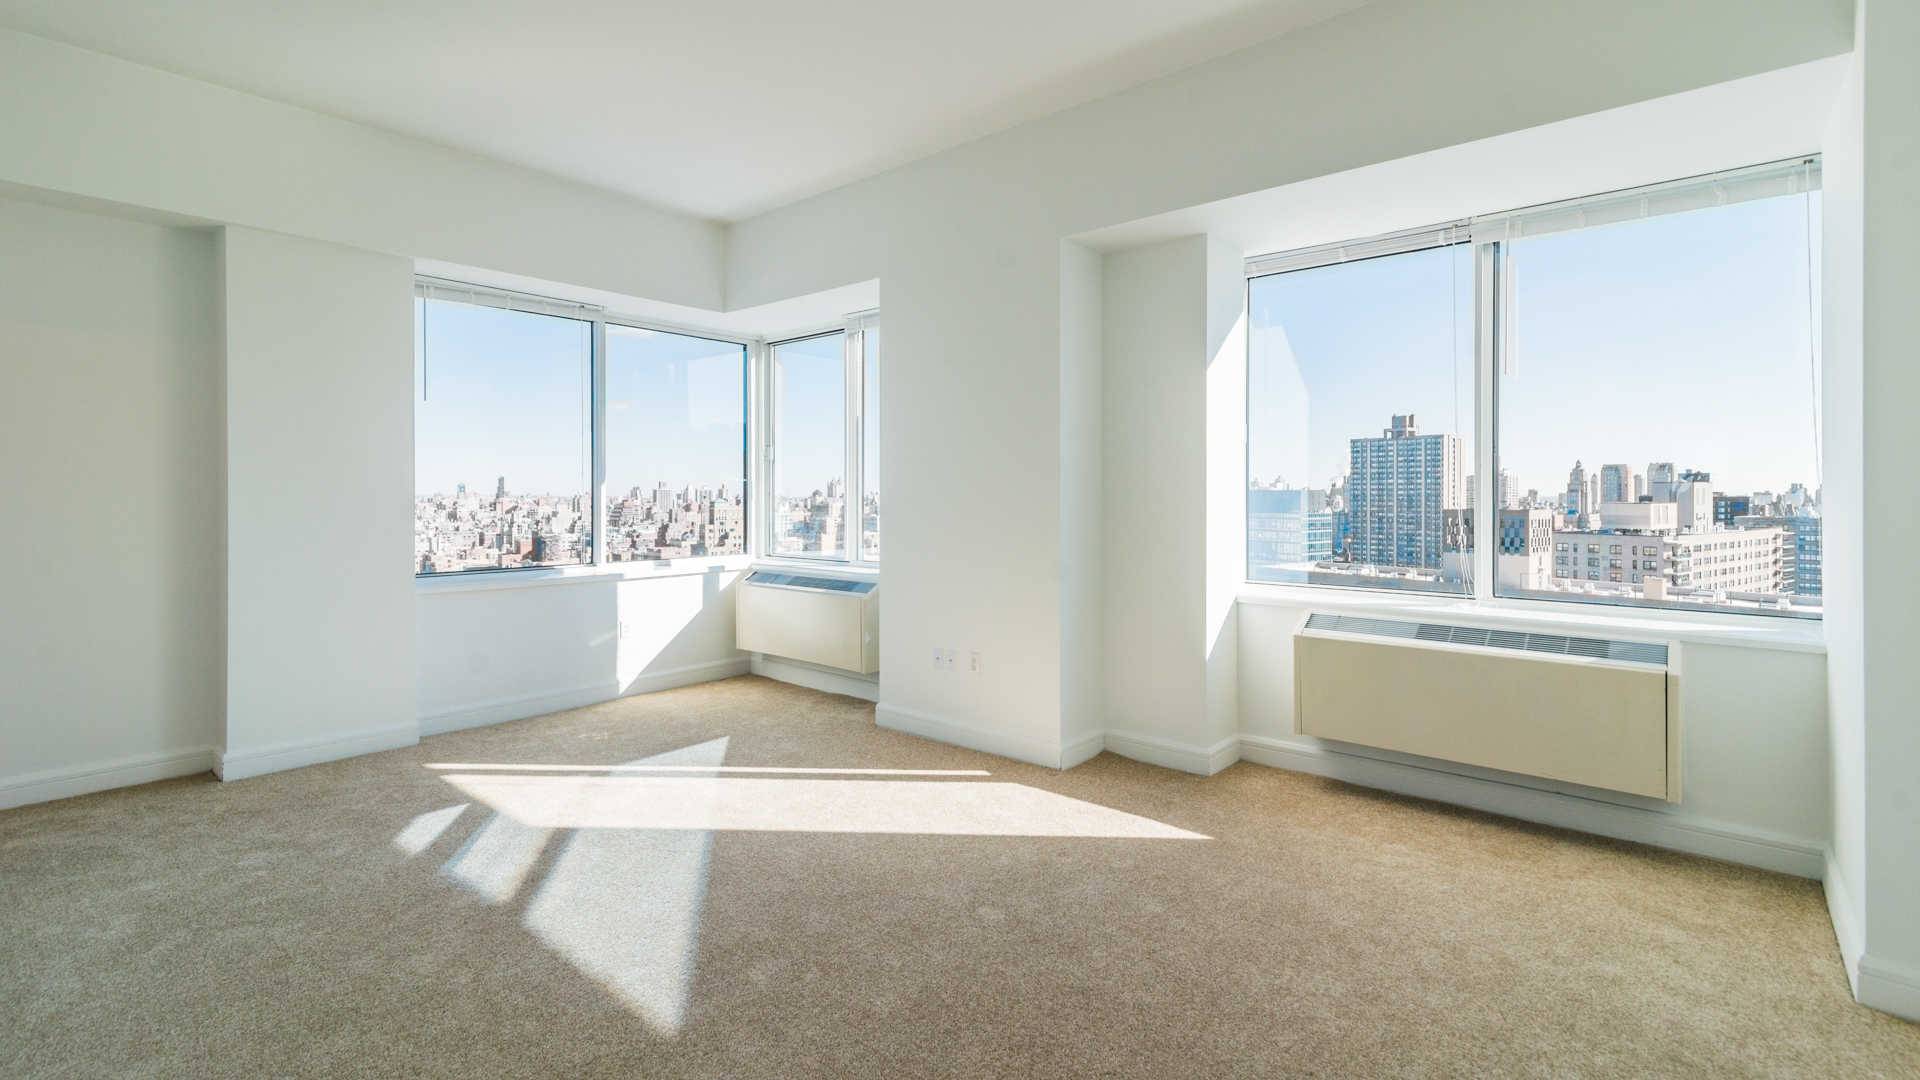 Luxury 1 bed in High-rise building on Upper West Side.